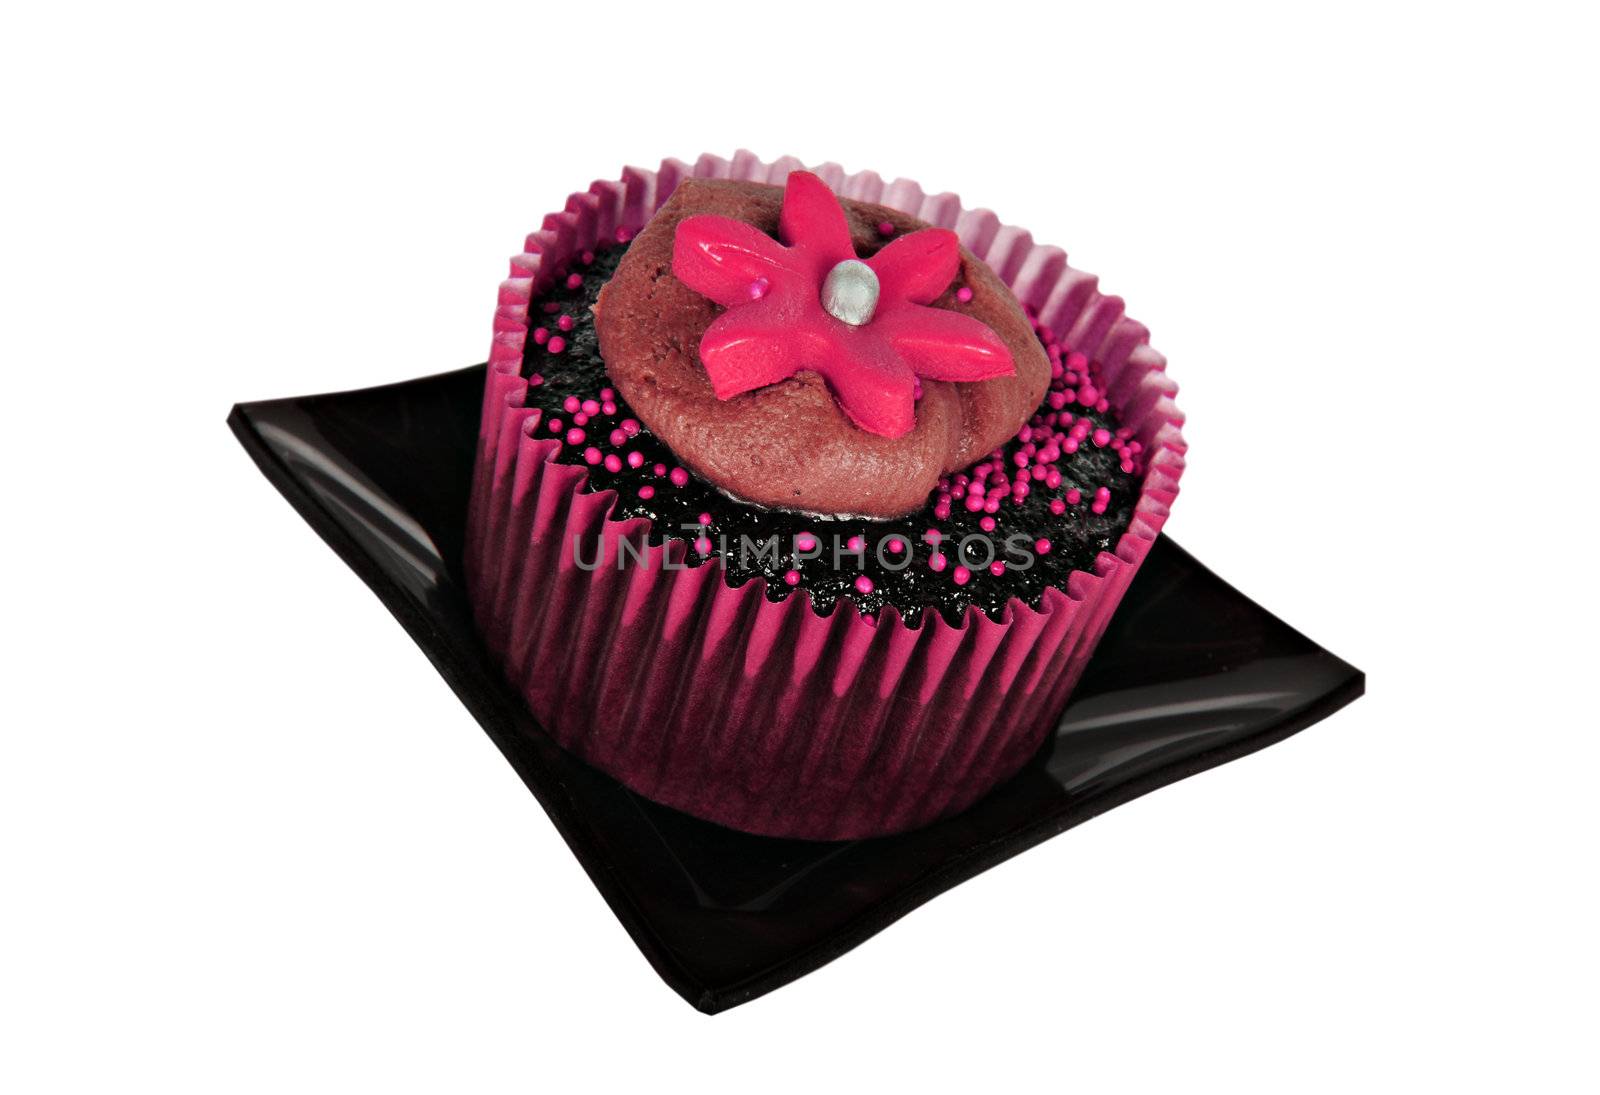 One chocolate cupcake with pink icing on white background